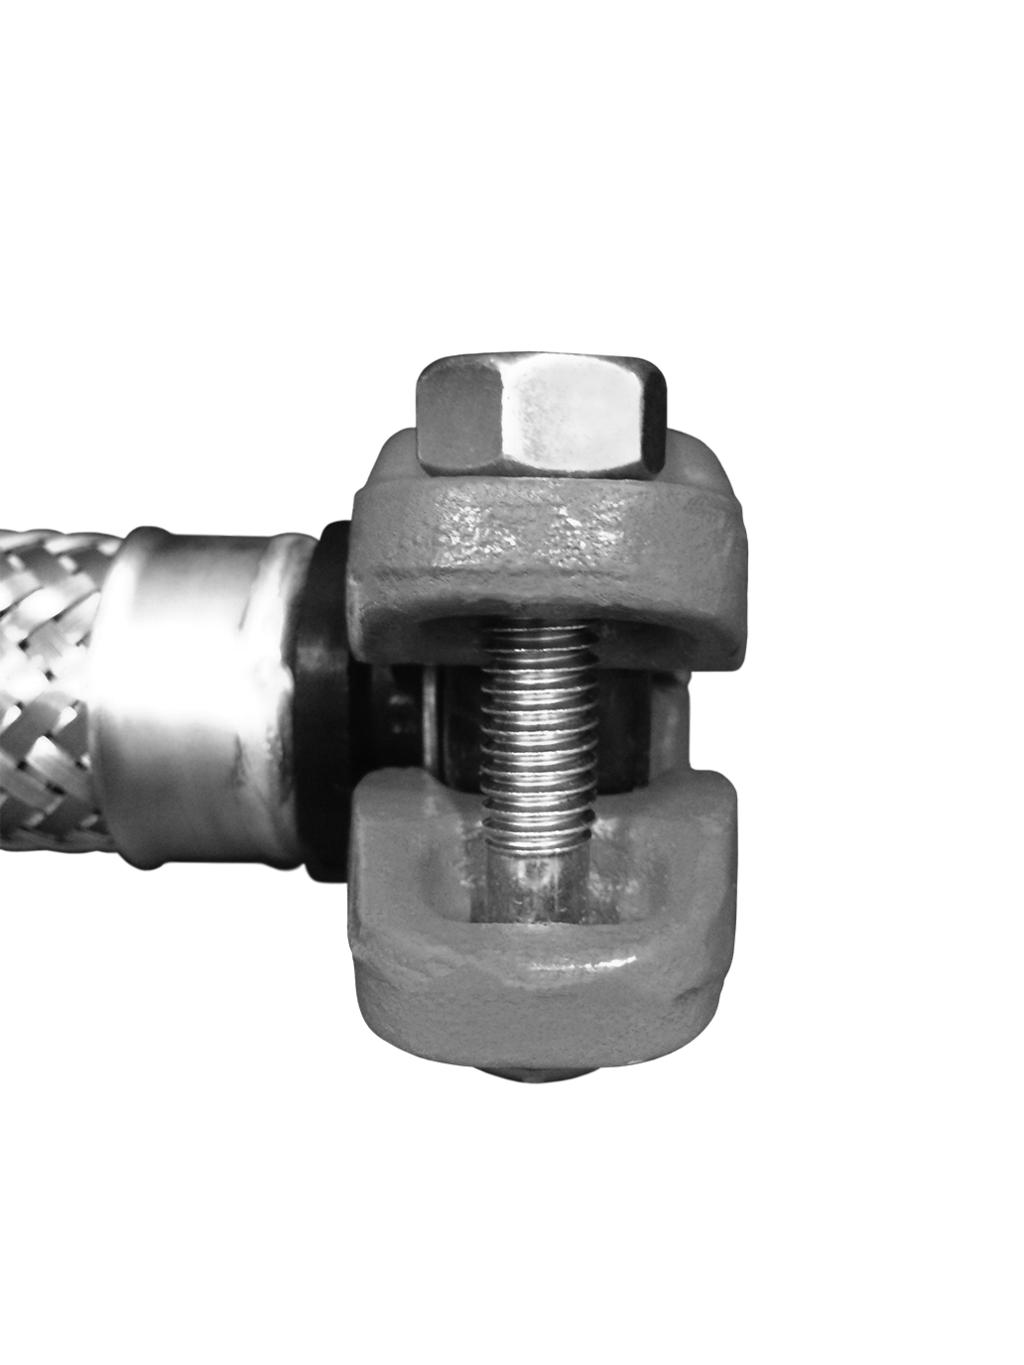 1-INCH/DN25 IGS CONNECTION TO THE SPRINKLER PIPING USING A SERIES SERIES AH2-CC FLEXIBLE HOSE CORRECT - IGS Groove Profile INCORRECT - Orignal Groove System (OGS) Groove Profile Pipe and grooves are